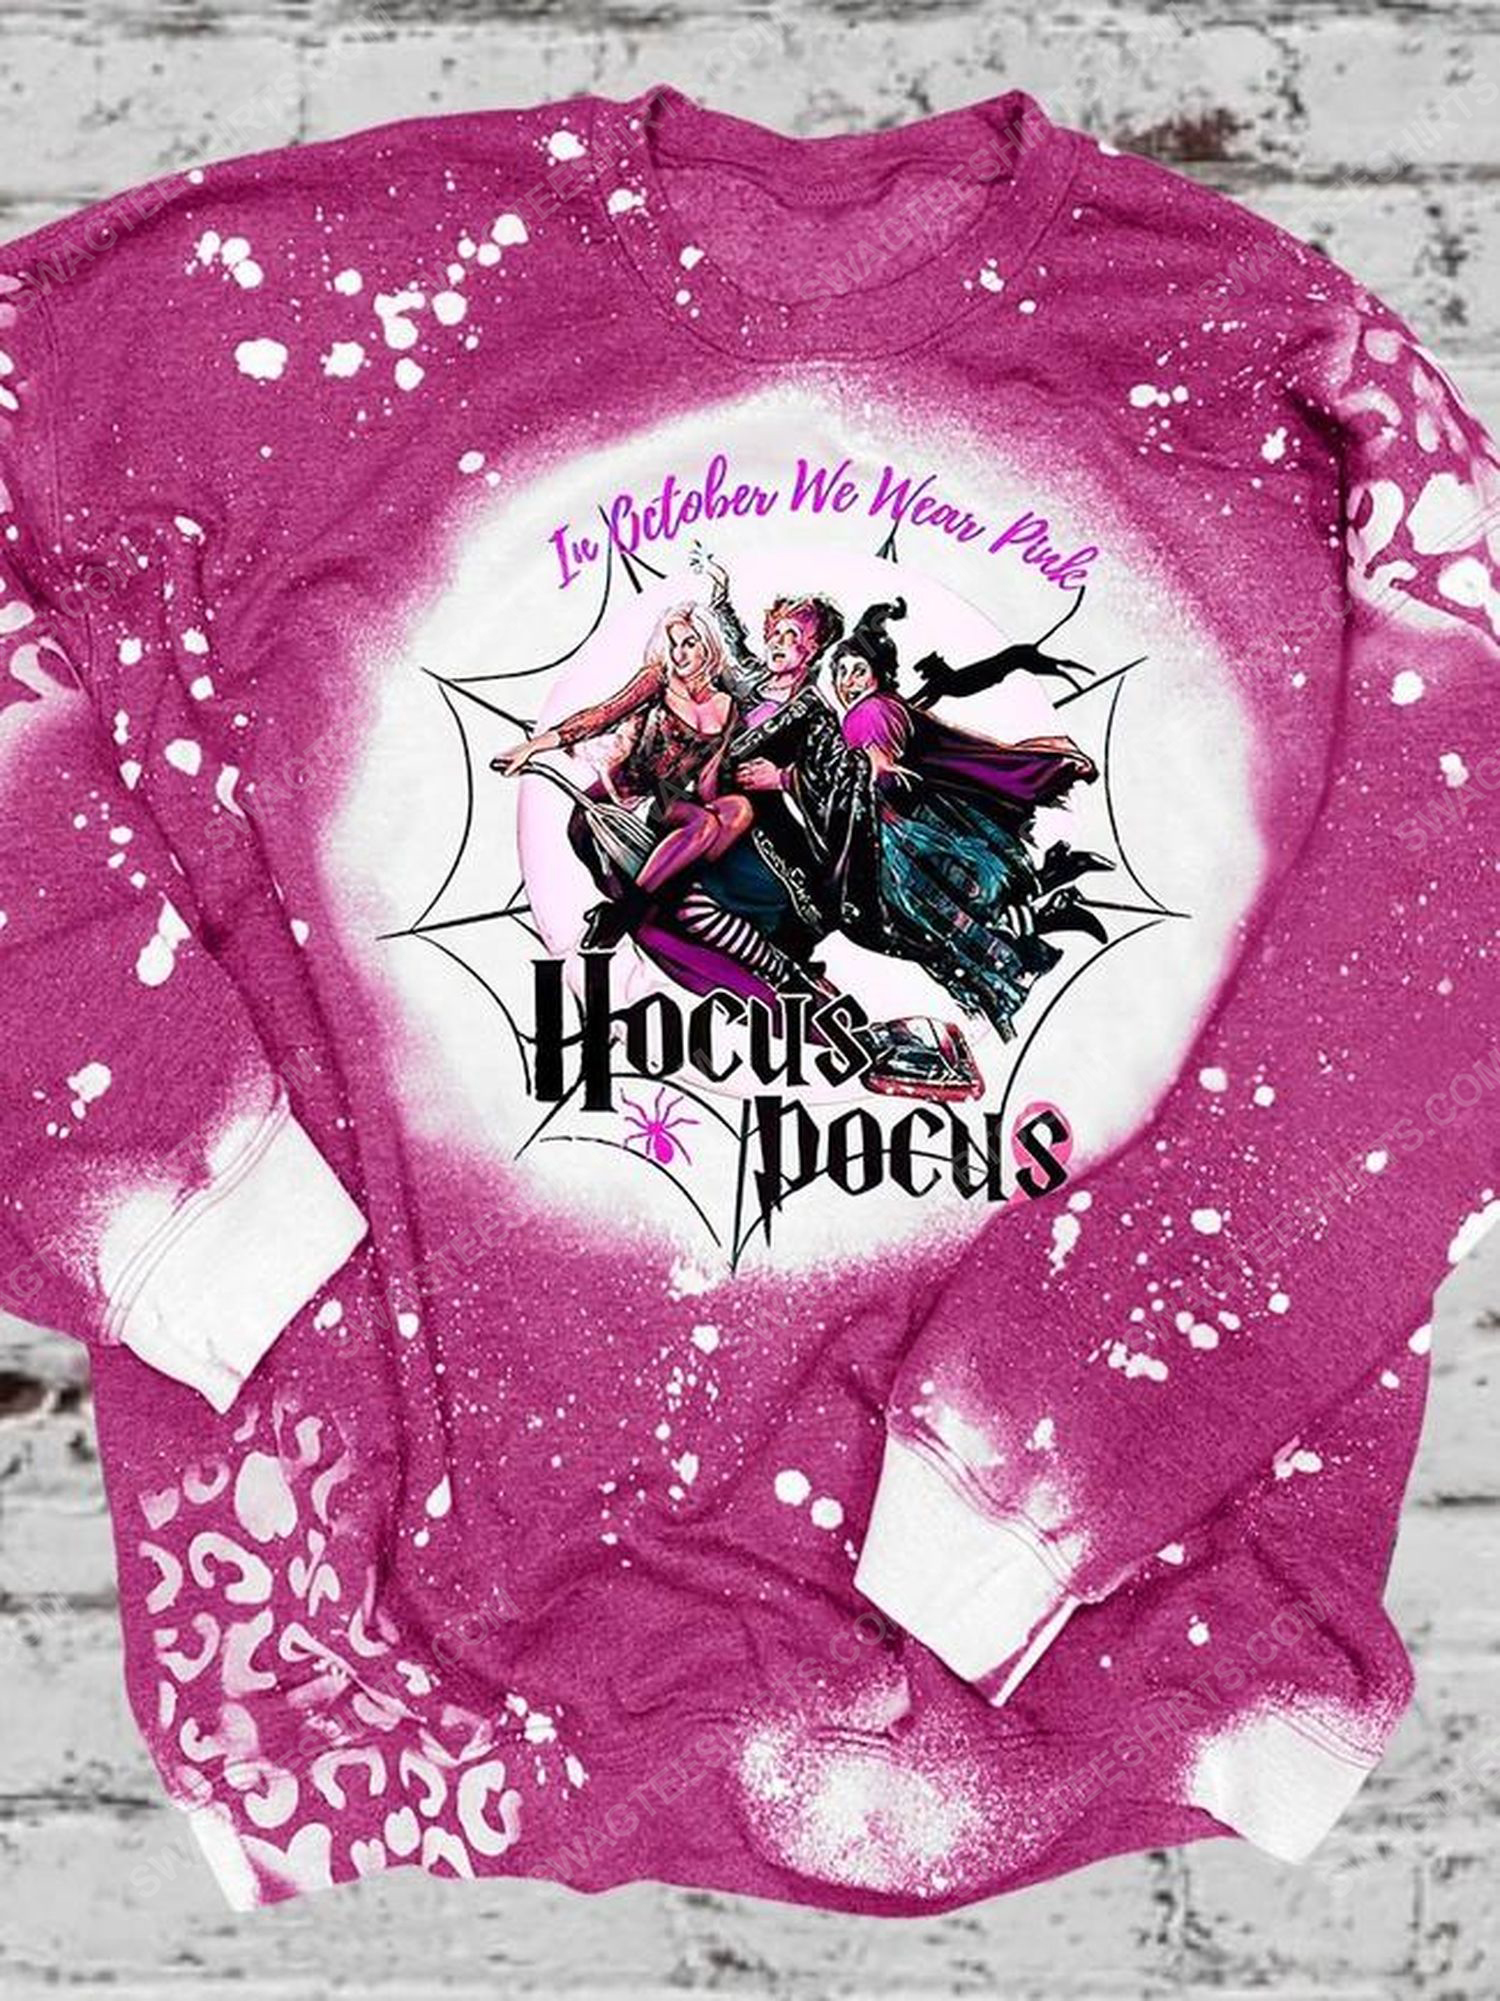 Breast cancer in october we wear pink hocus pocus full print shirt 1